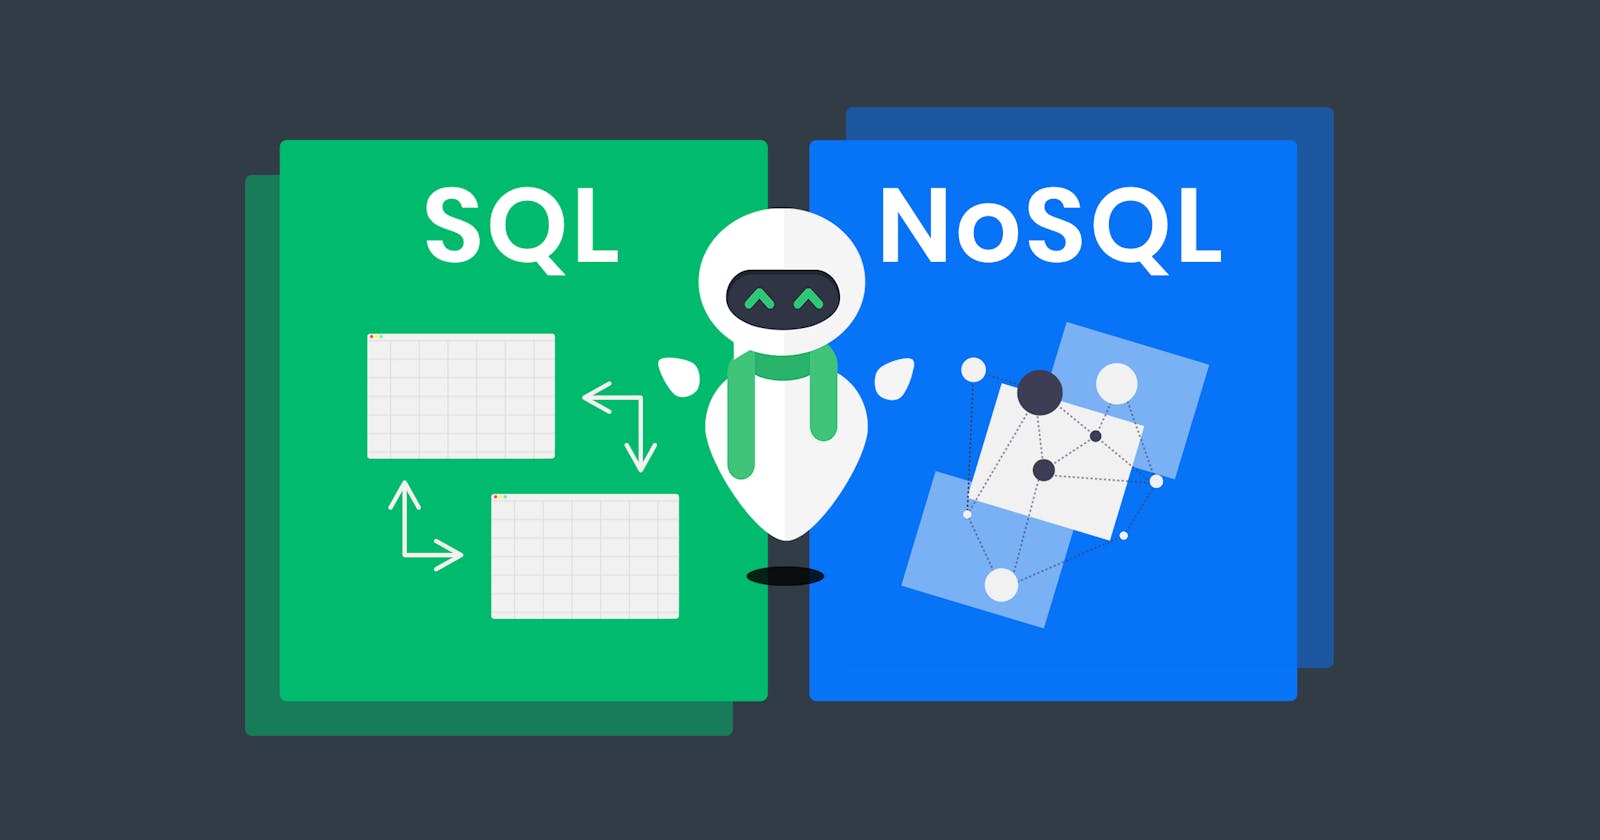 Relational (SQL) and non relational (noSQL) databases